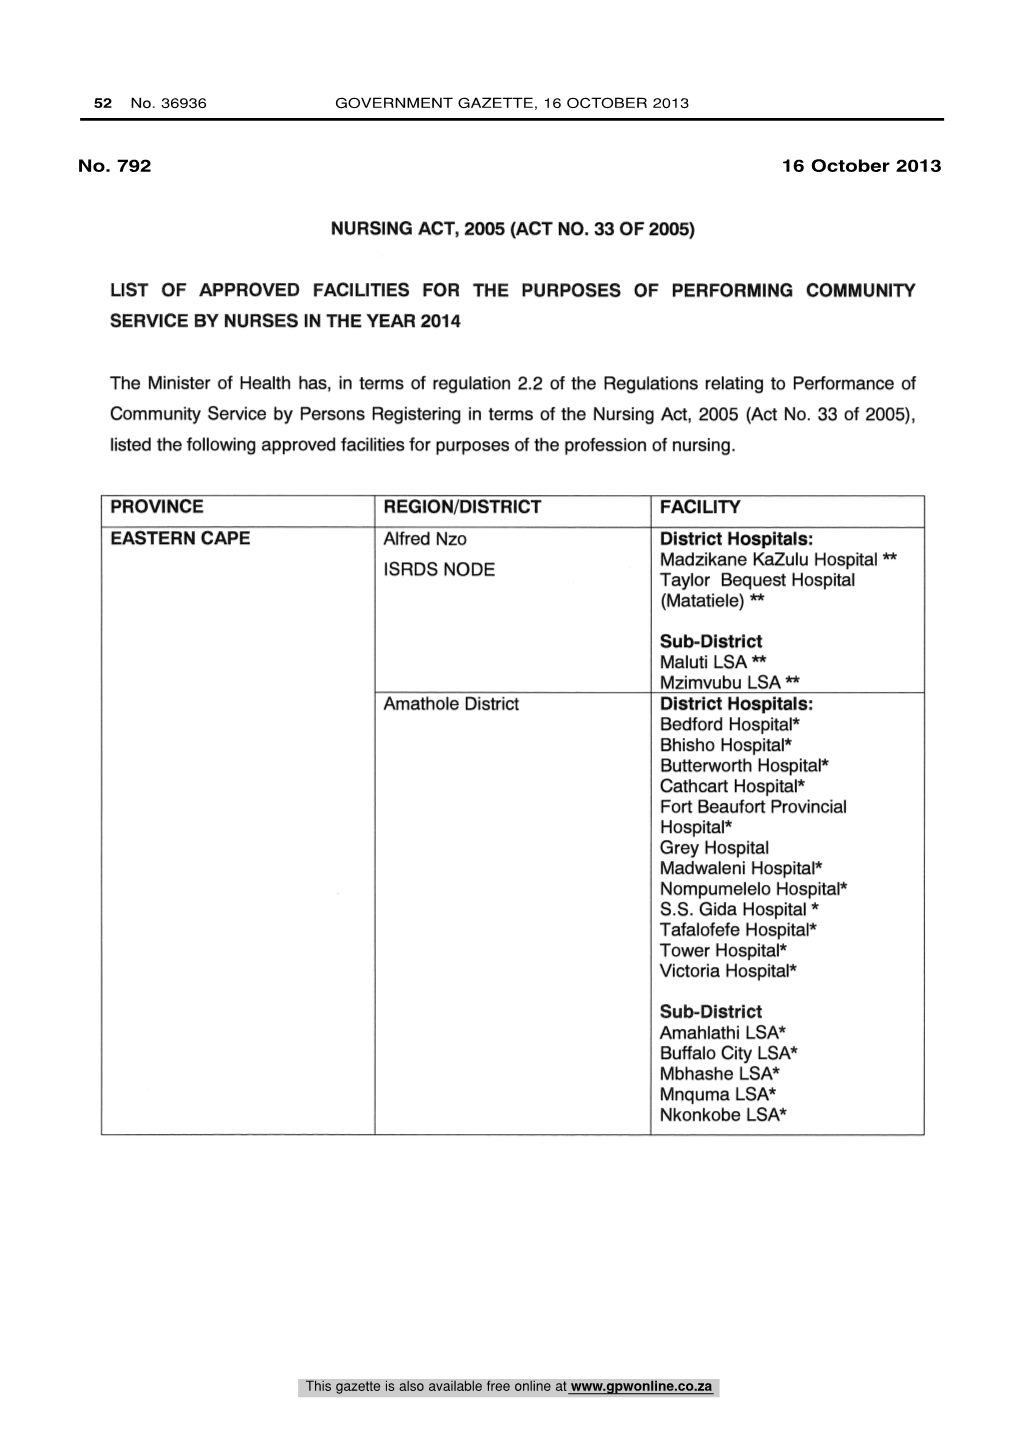 Nursing Act: List of Approved Facilities for the Purposes of Performing Community Service by Nurses in the Year 2014